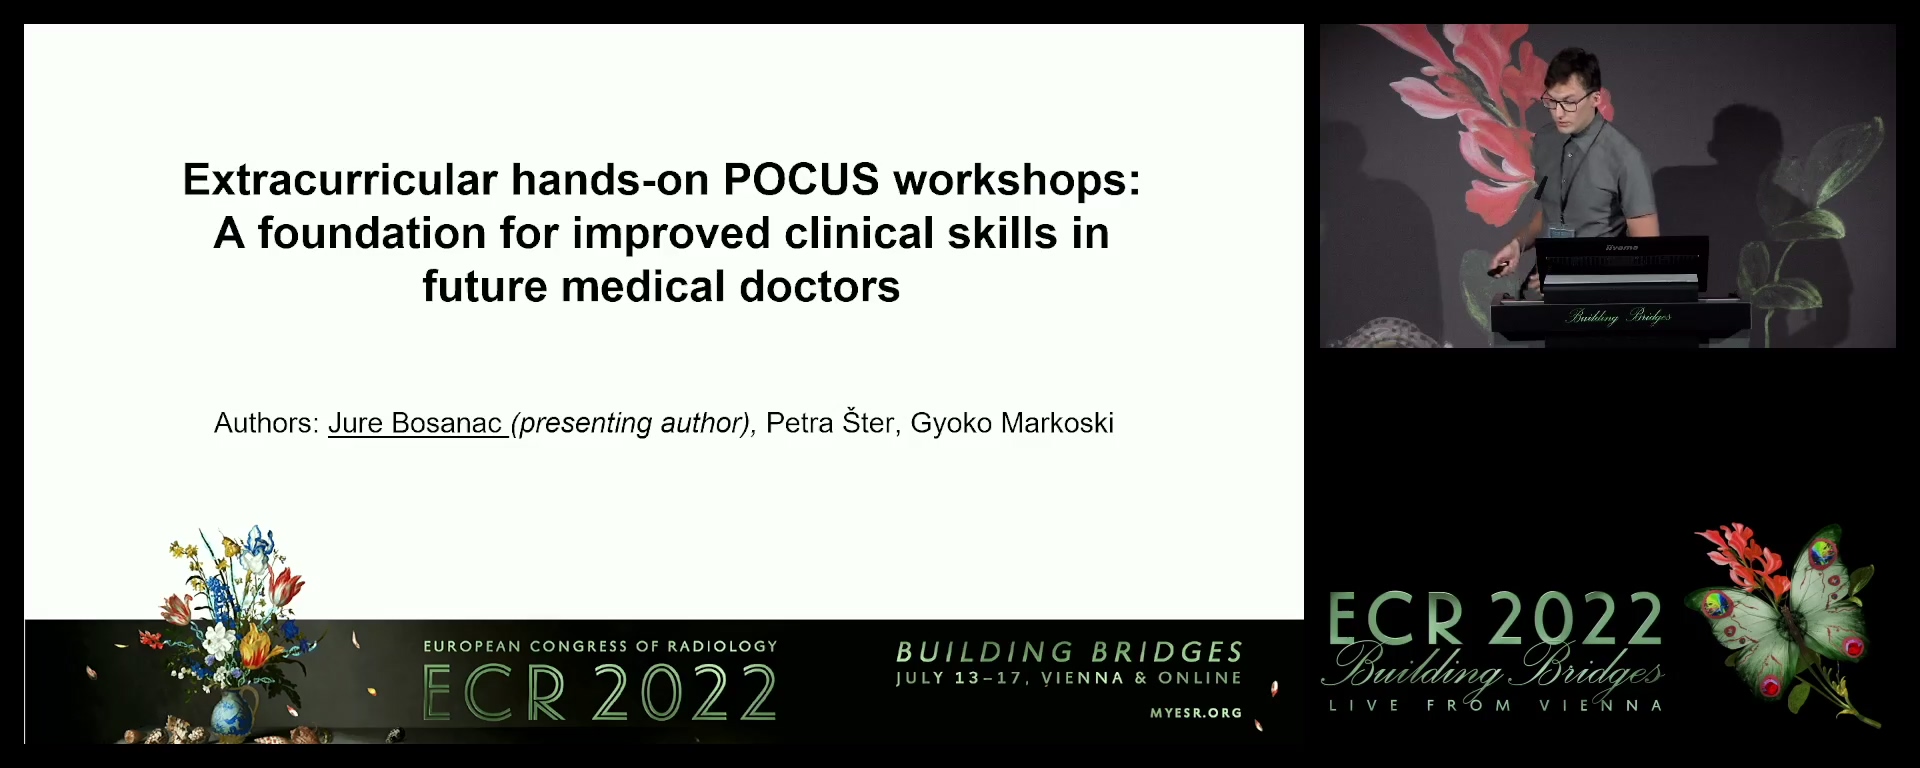 Extracurricular hands-on POCUS workshops - a foundation for improved clinical skills in future medical doctors - Jure Bosanac, Ljubljana / SI